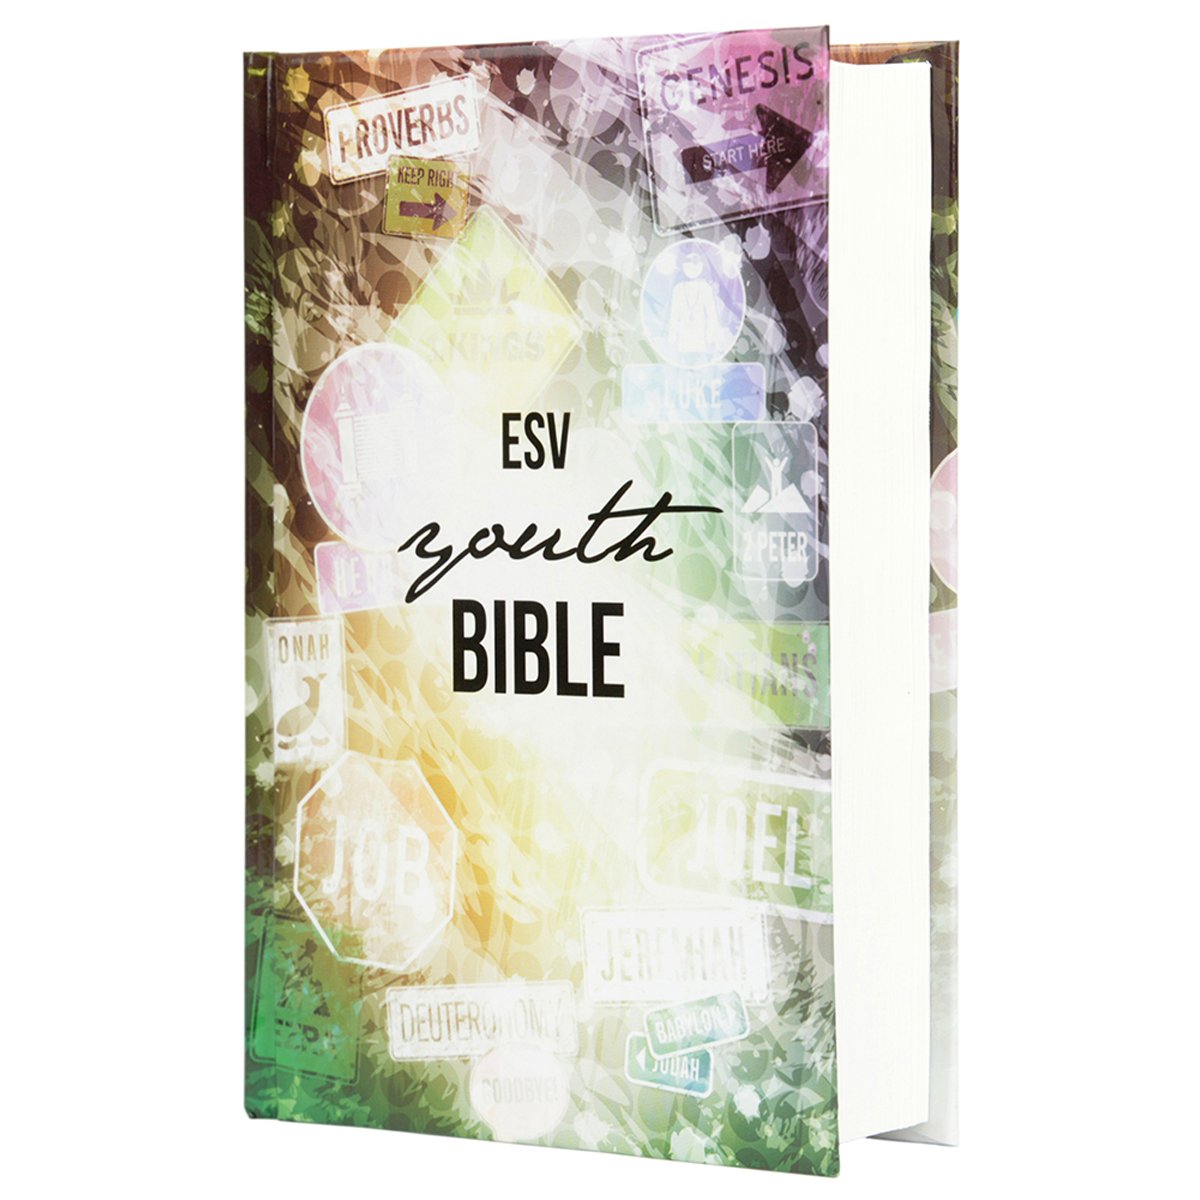 ESV Youth Bible (Hardcover)